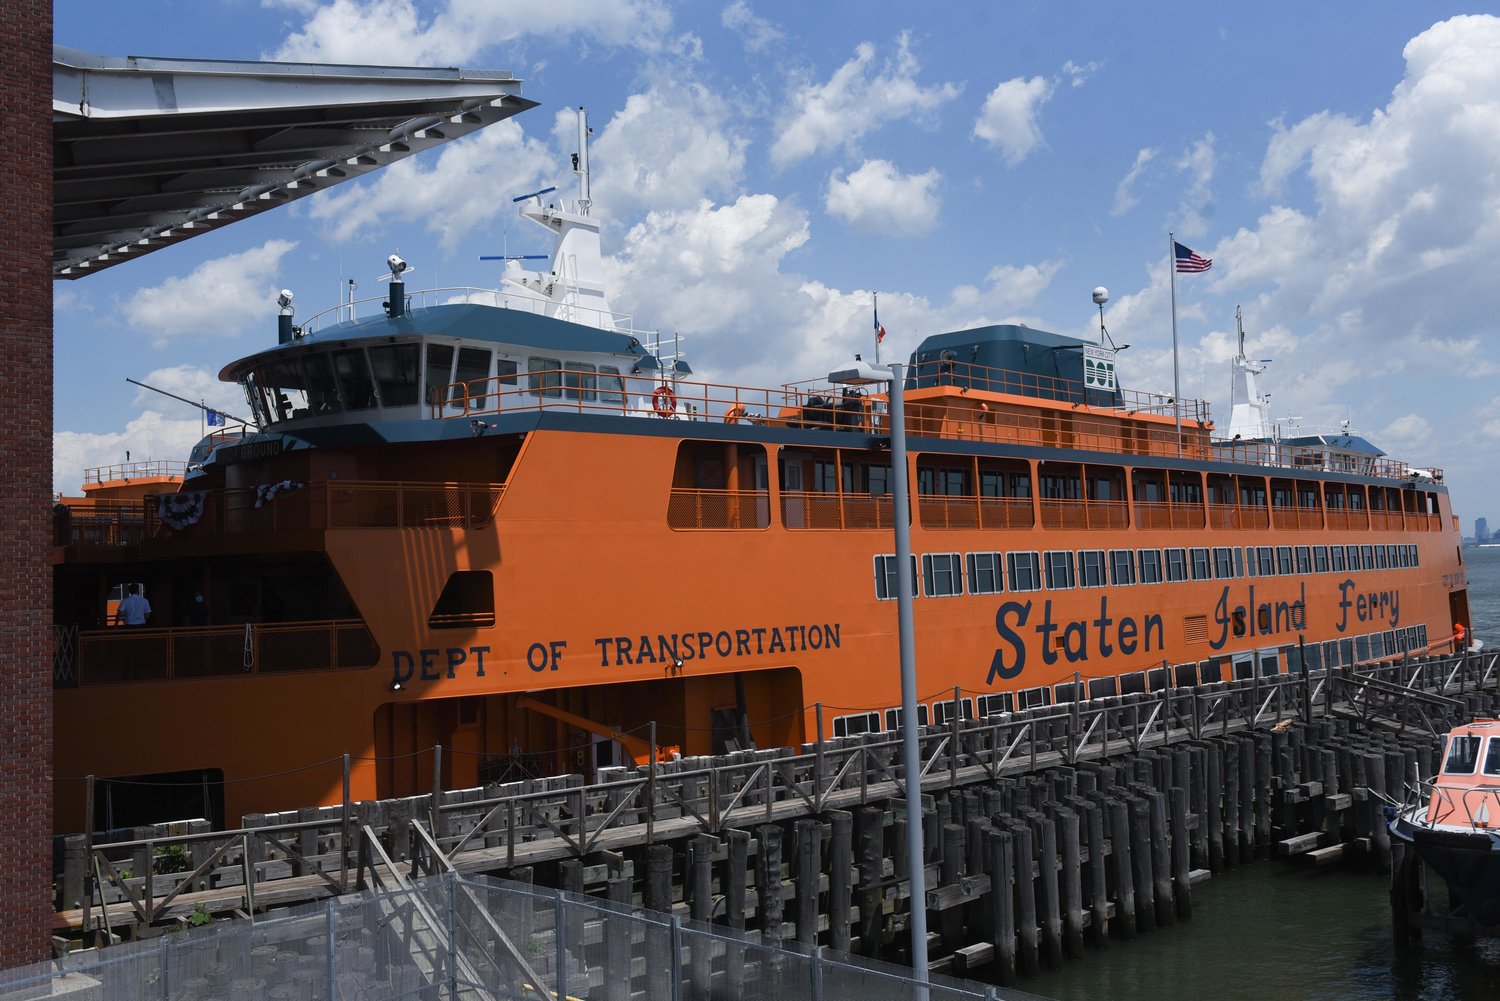 The inaugural ferry ride of the ‘Sandy Ground’ Staten Island ferry on June 17.  The City Comptroller released a preliminary decision Oct. 27 that found that Staten Island Ferry chief marine engineers deserved prevailing wages comparable to other marine engineers in the city, but more information is required to determine at what rate they should be paid.